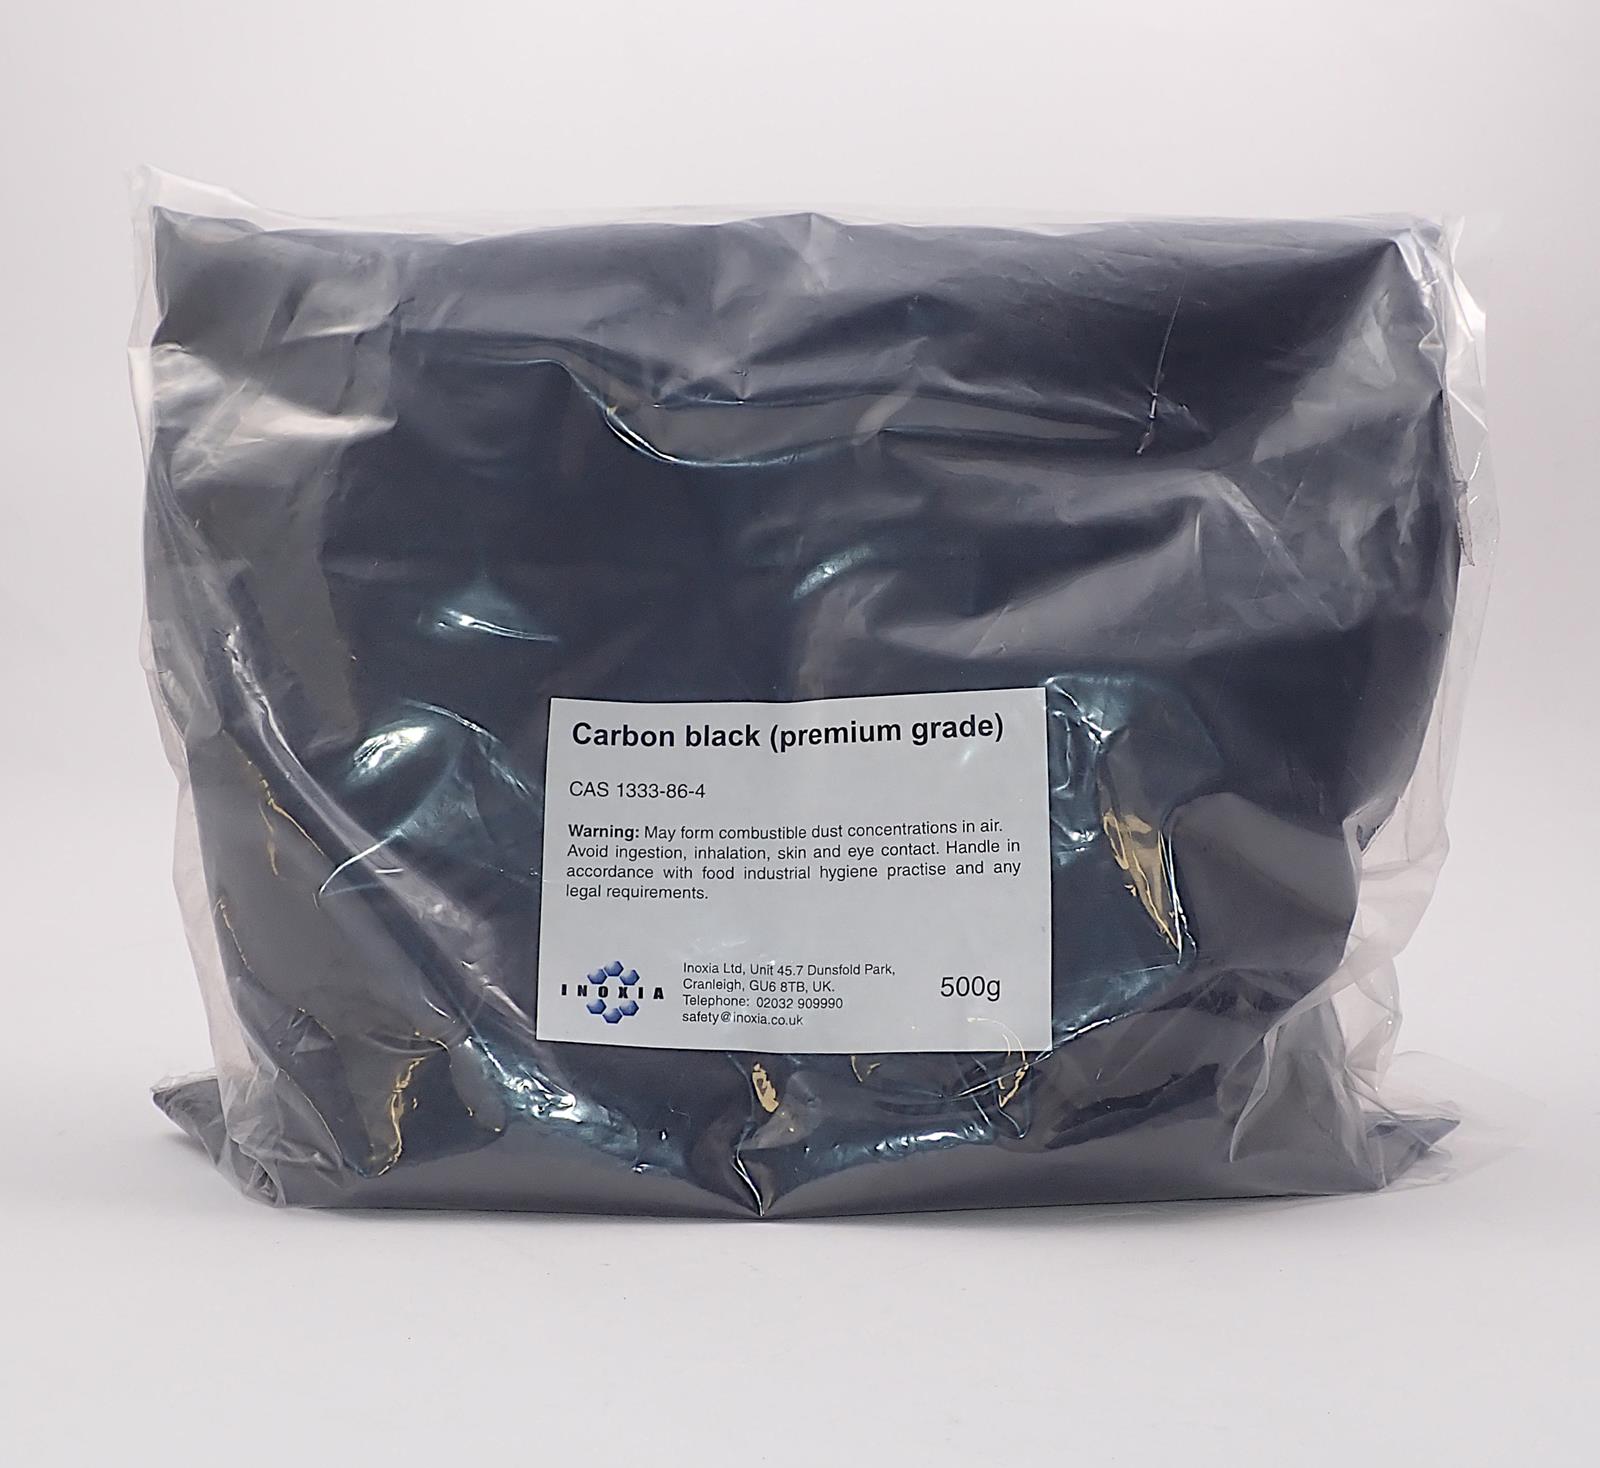  Lampblack (Carbonblack/Soot) Pigment - Weight: 500g - by Inoxia